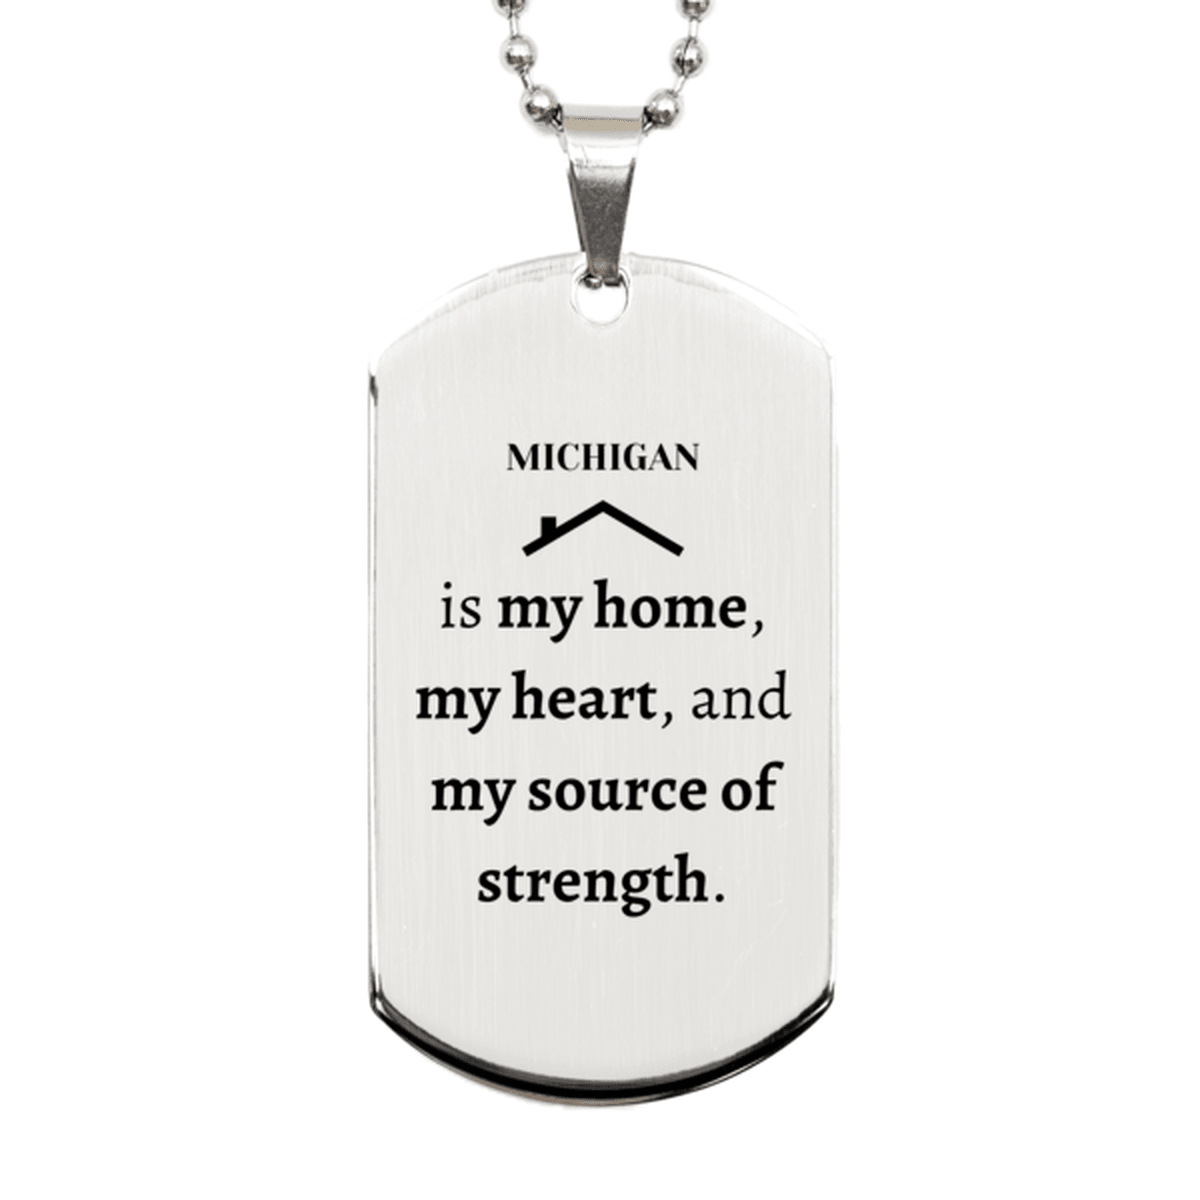 Michigan is my home Gifts, Lovely Michigan Birthday Christmas Silver Dog Tag For People from Michigan, Men, Women, Friends - Mallard Moon Gift Shop